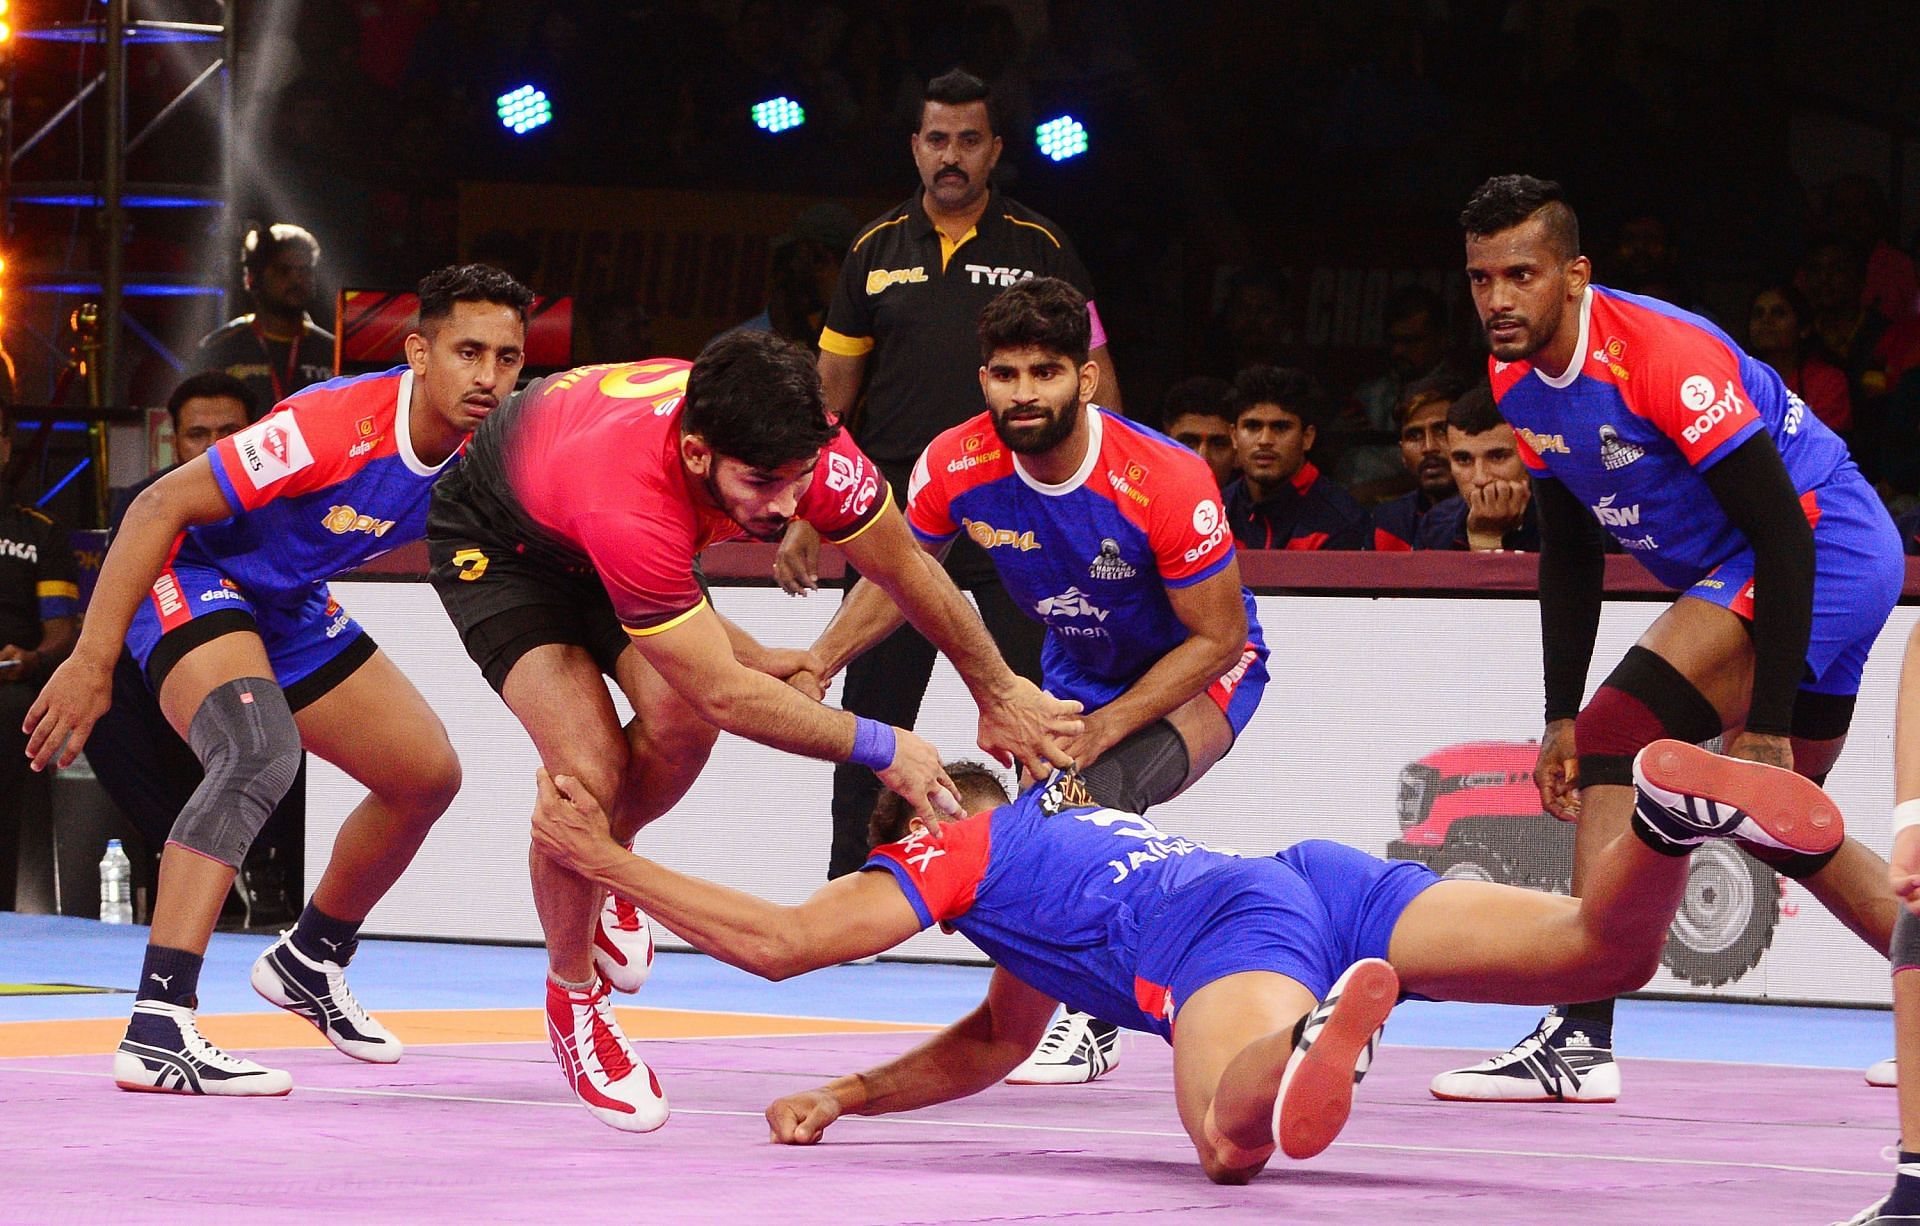 Naveen Kumar and Siddharth Desai will clash in a thrilling encounter (Credit: PKL)